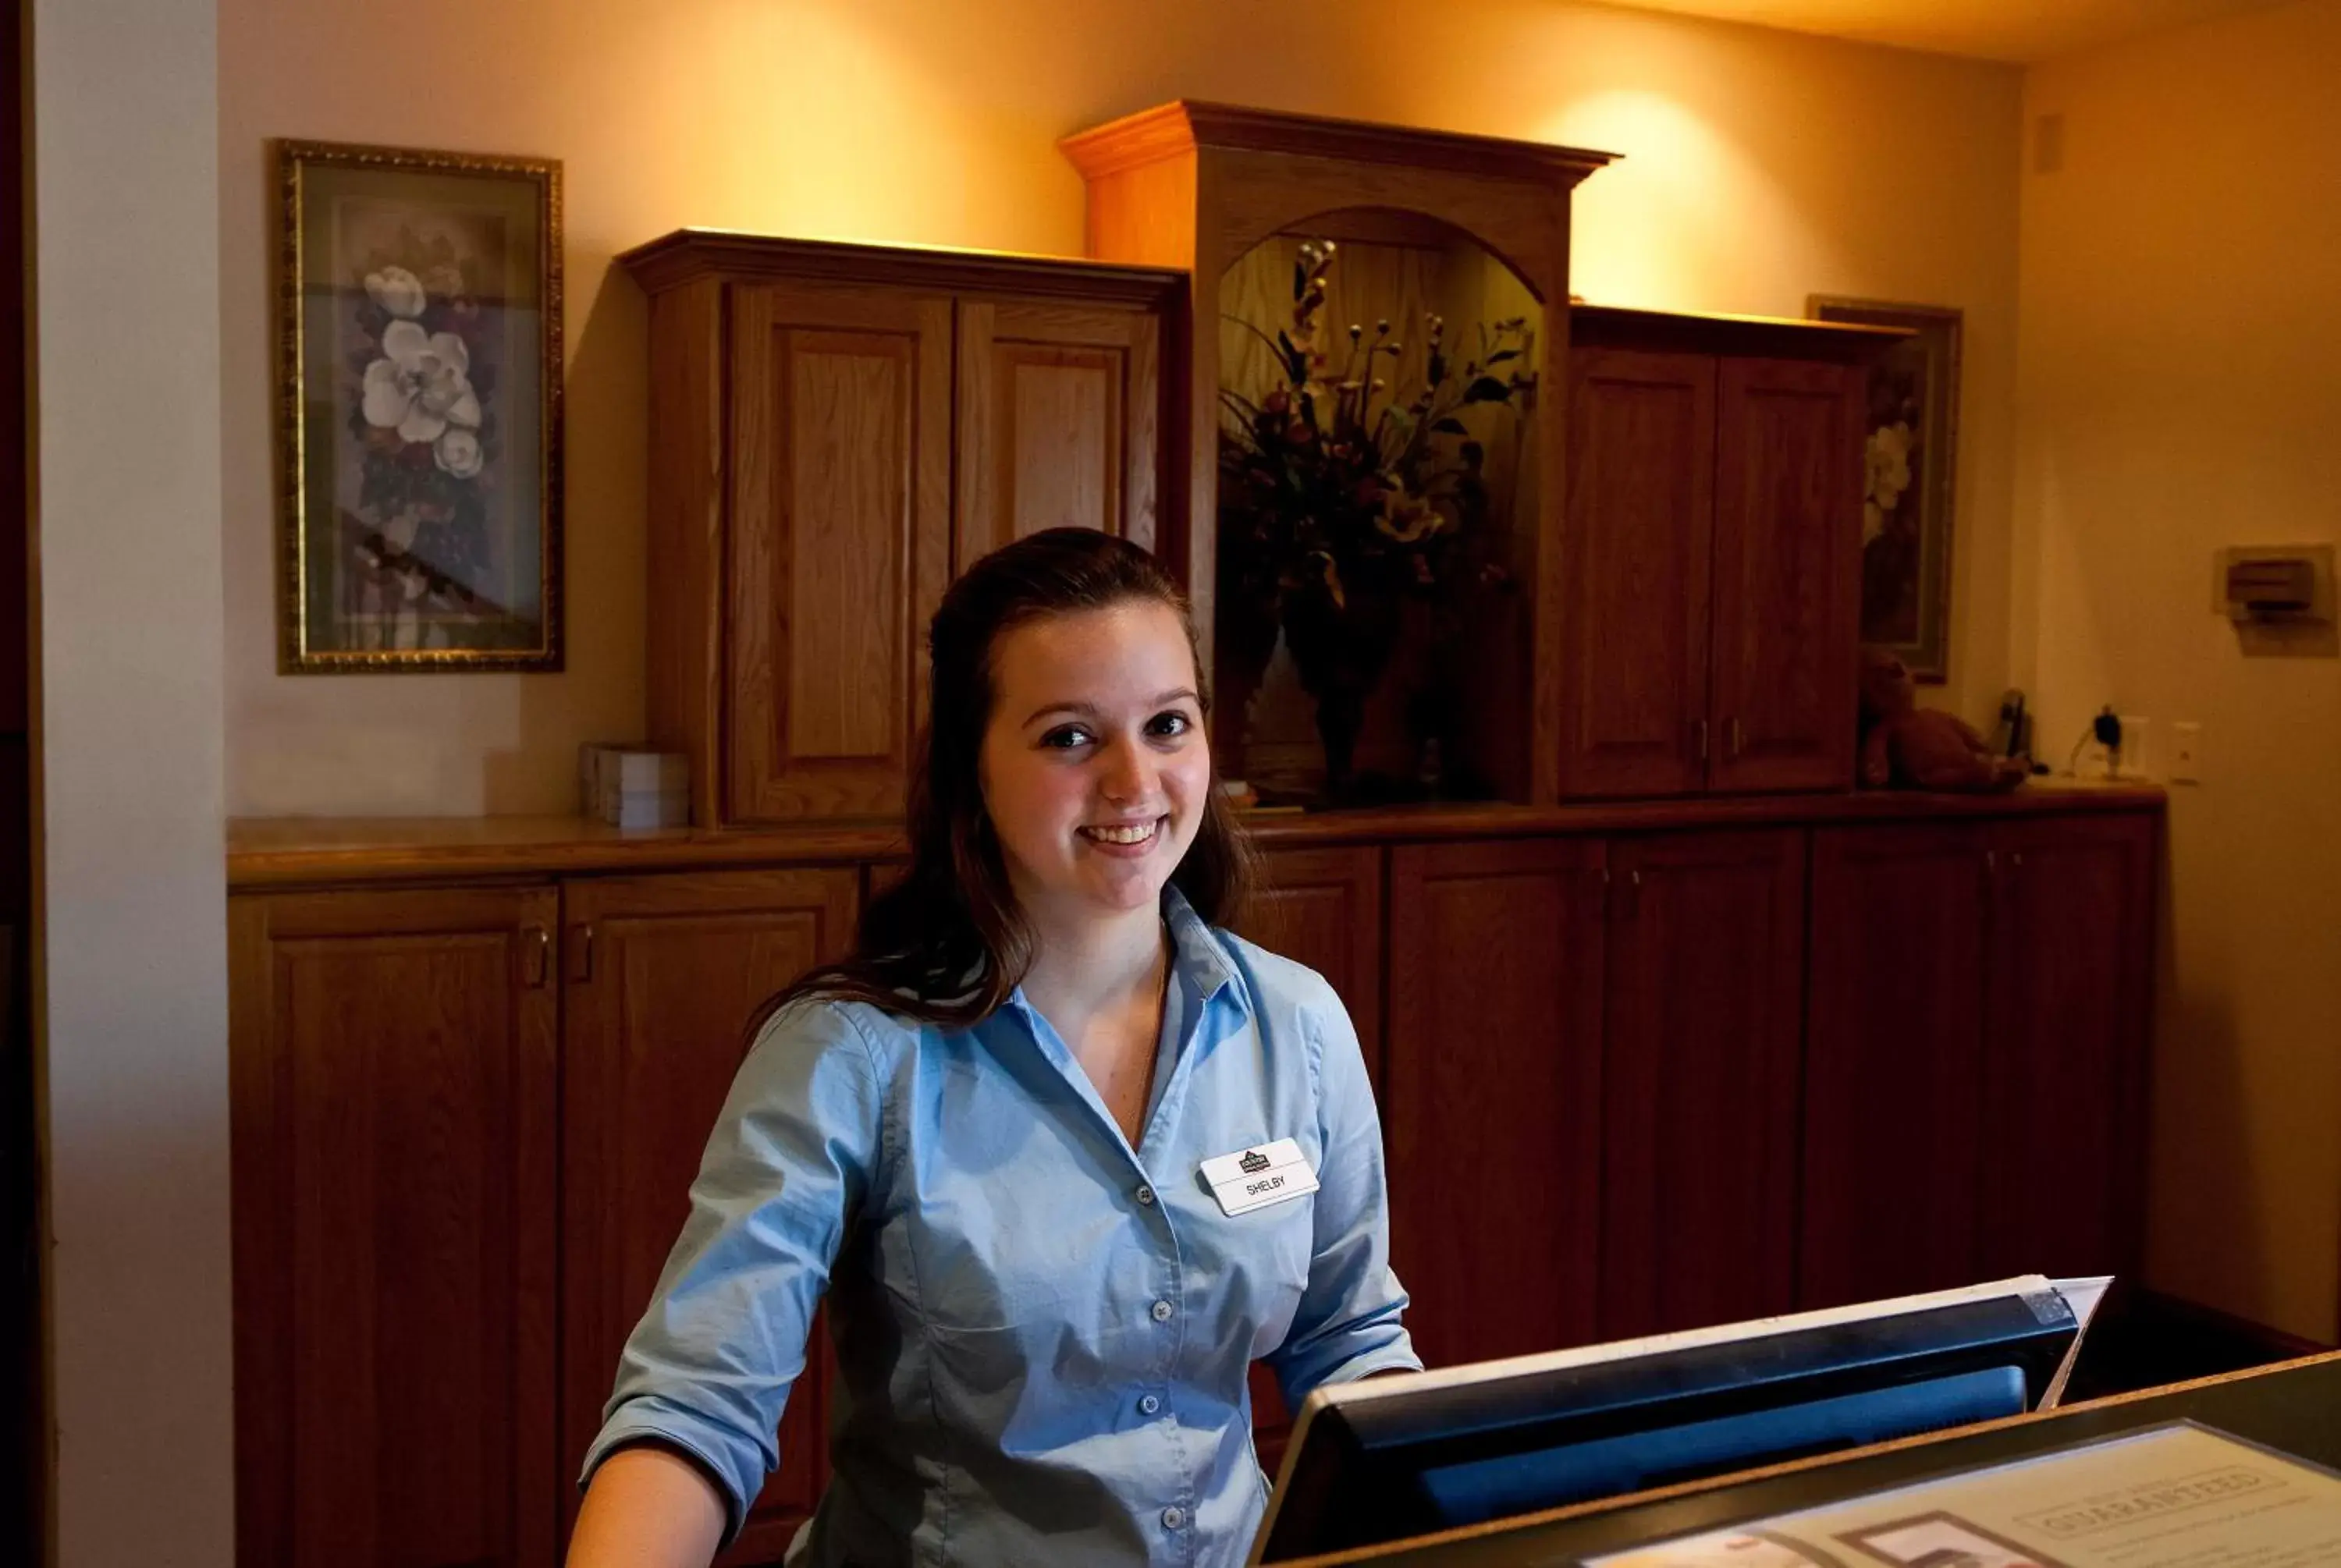 Staff in Country Inn & Suites by Radisson, Rapid City, SD